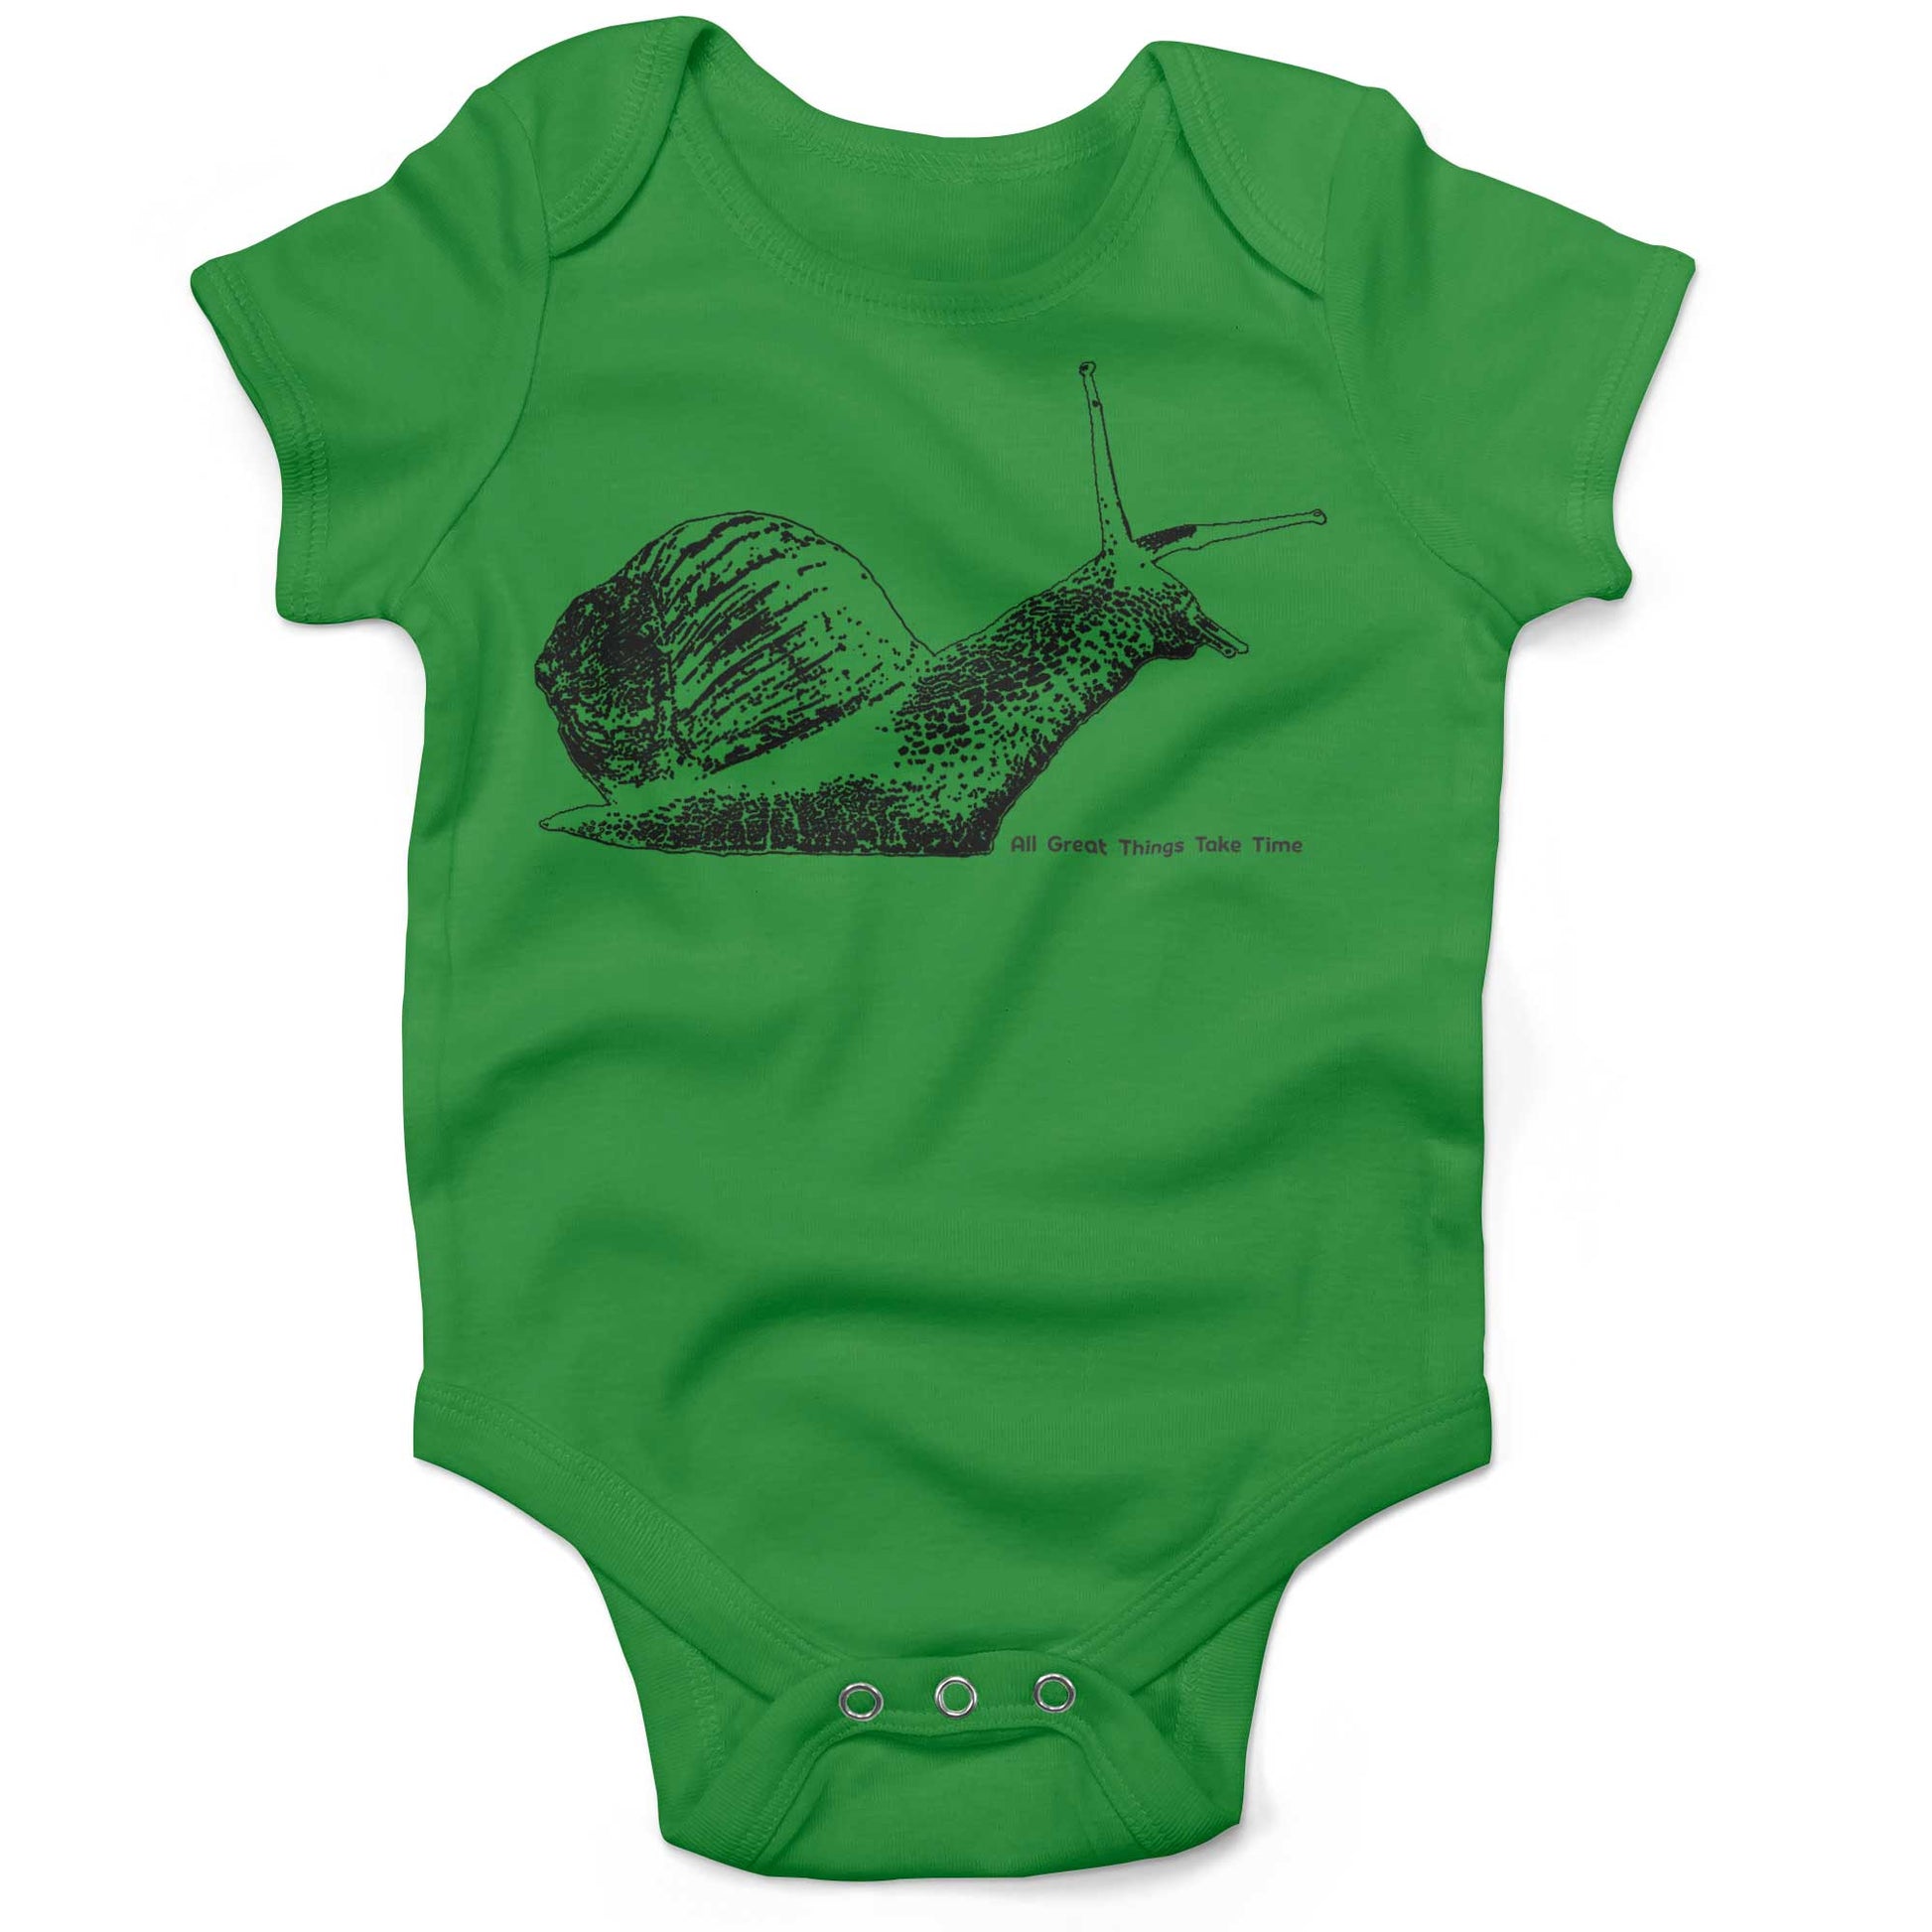 All Great Things Take Time Baby One Piece-Grass Green-3-6 months